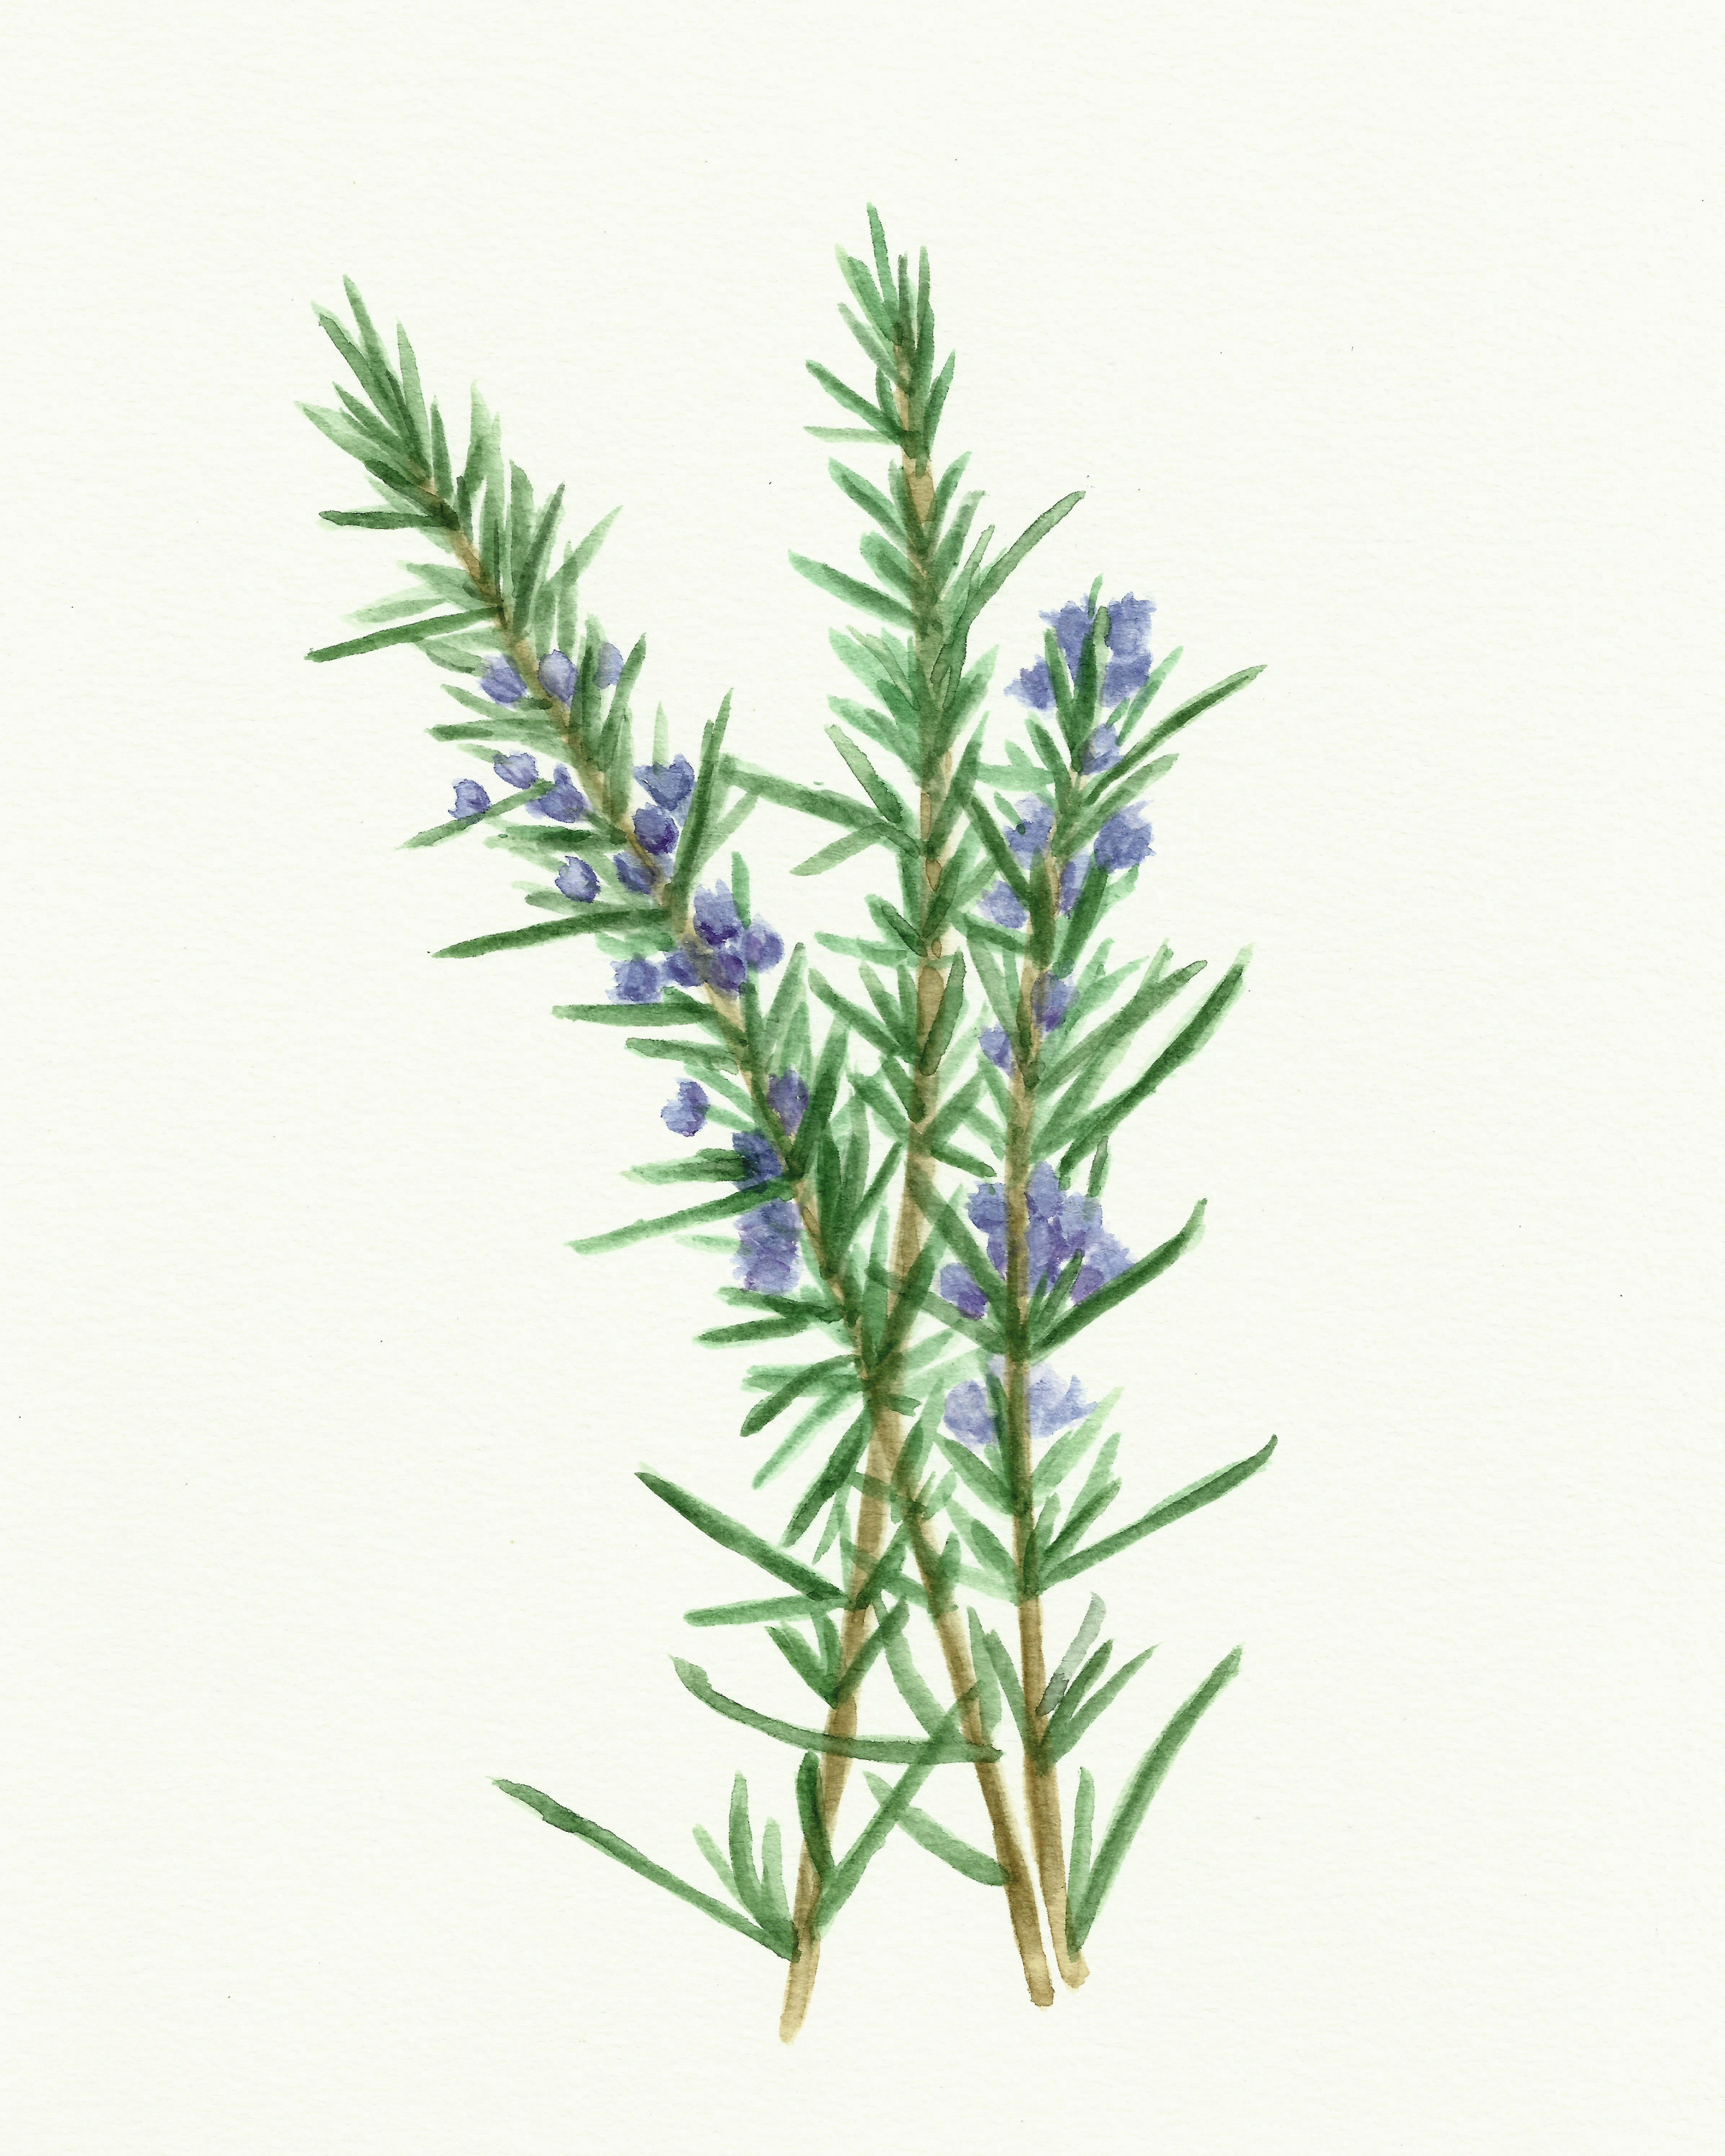 Free Herb Watercolor Printables Rosemary and Oregano! The Graphics Fairy